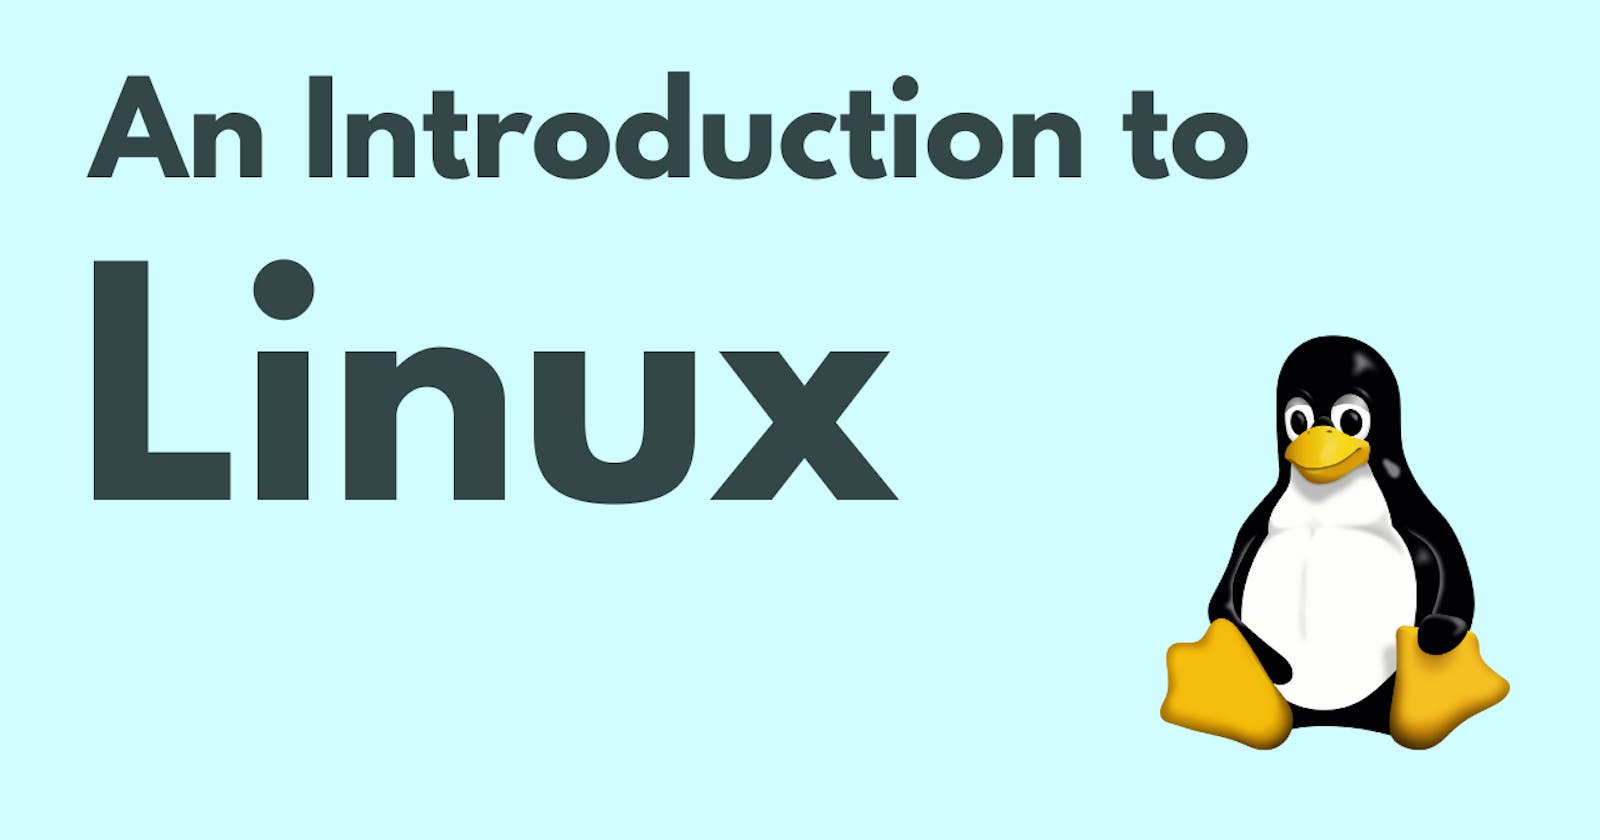 An Introduction to Linux